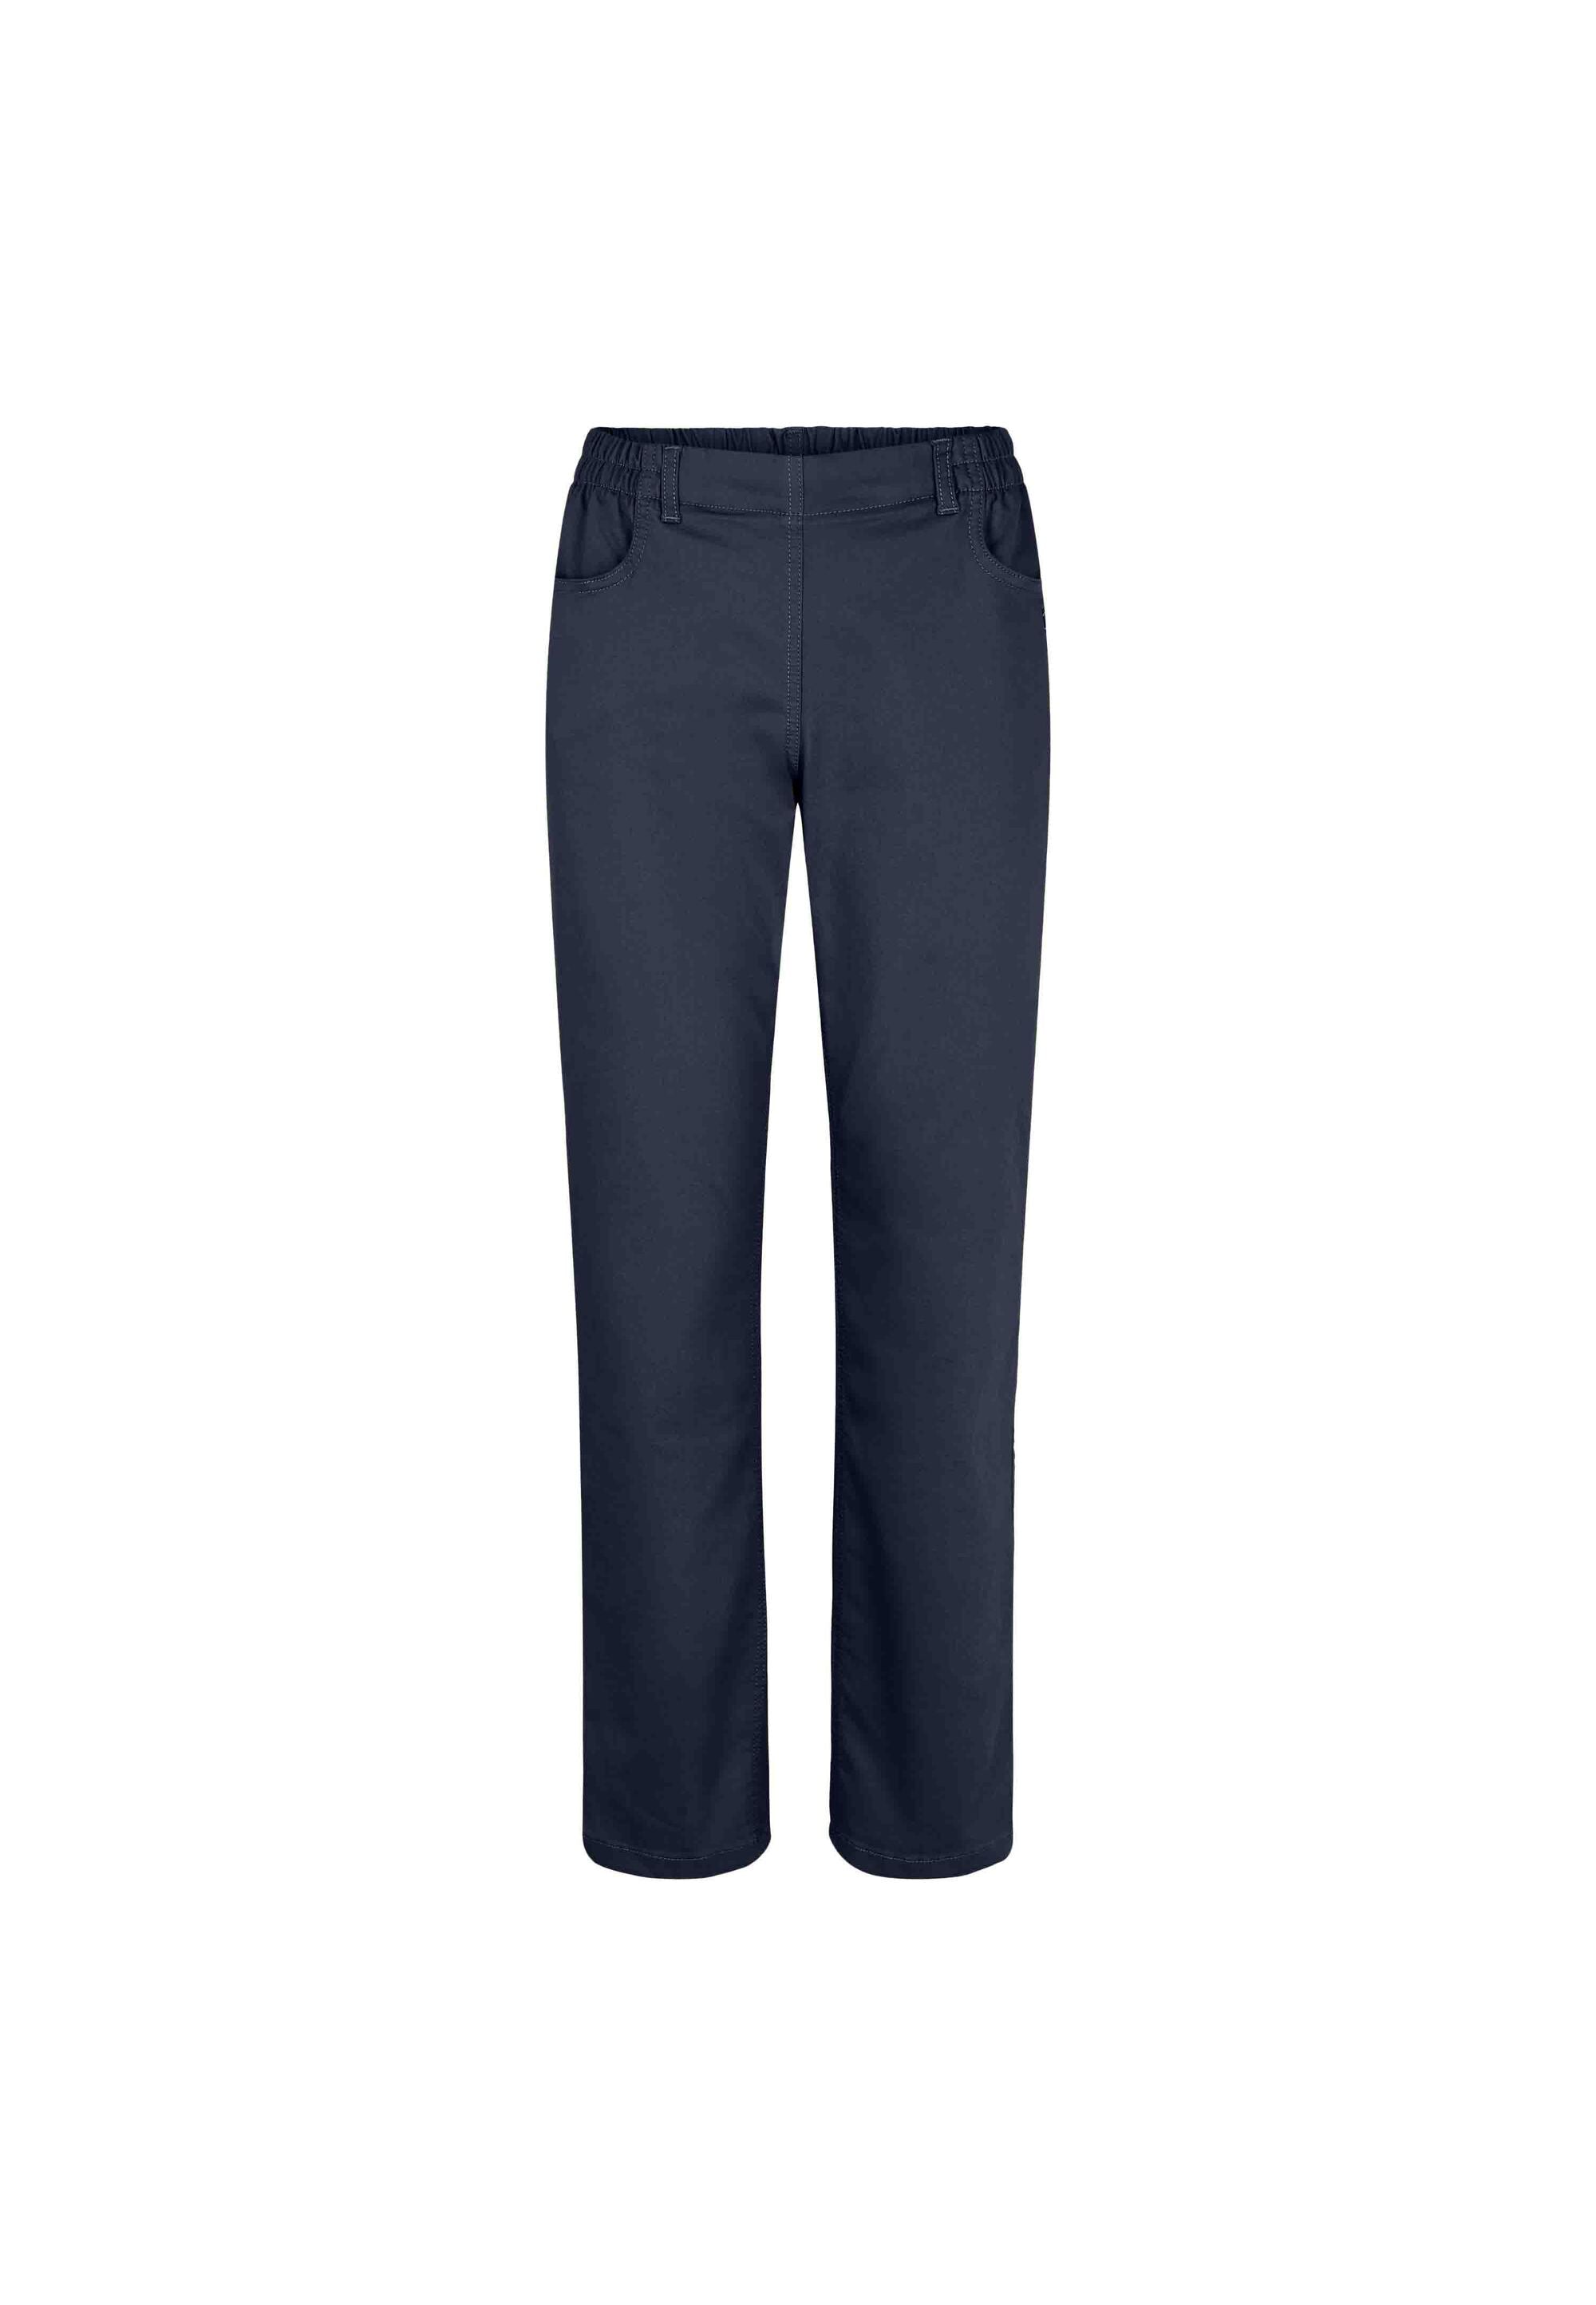 LAURIE  Violet Relaxed - Medium Length Trousers RELAXED Marine